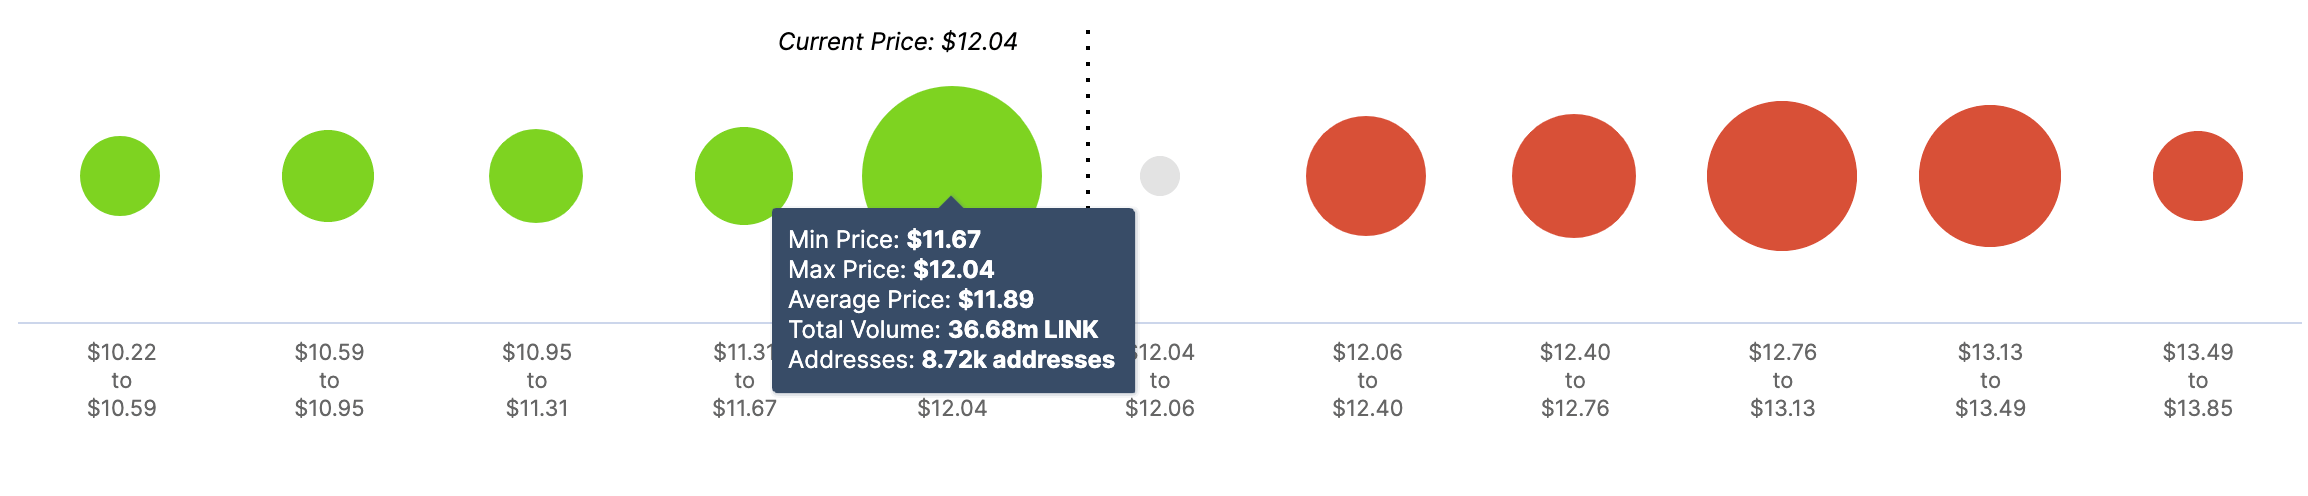 LINK In/Out of the Money Around Price